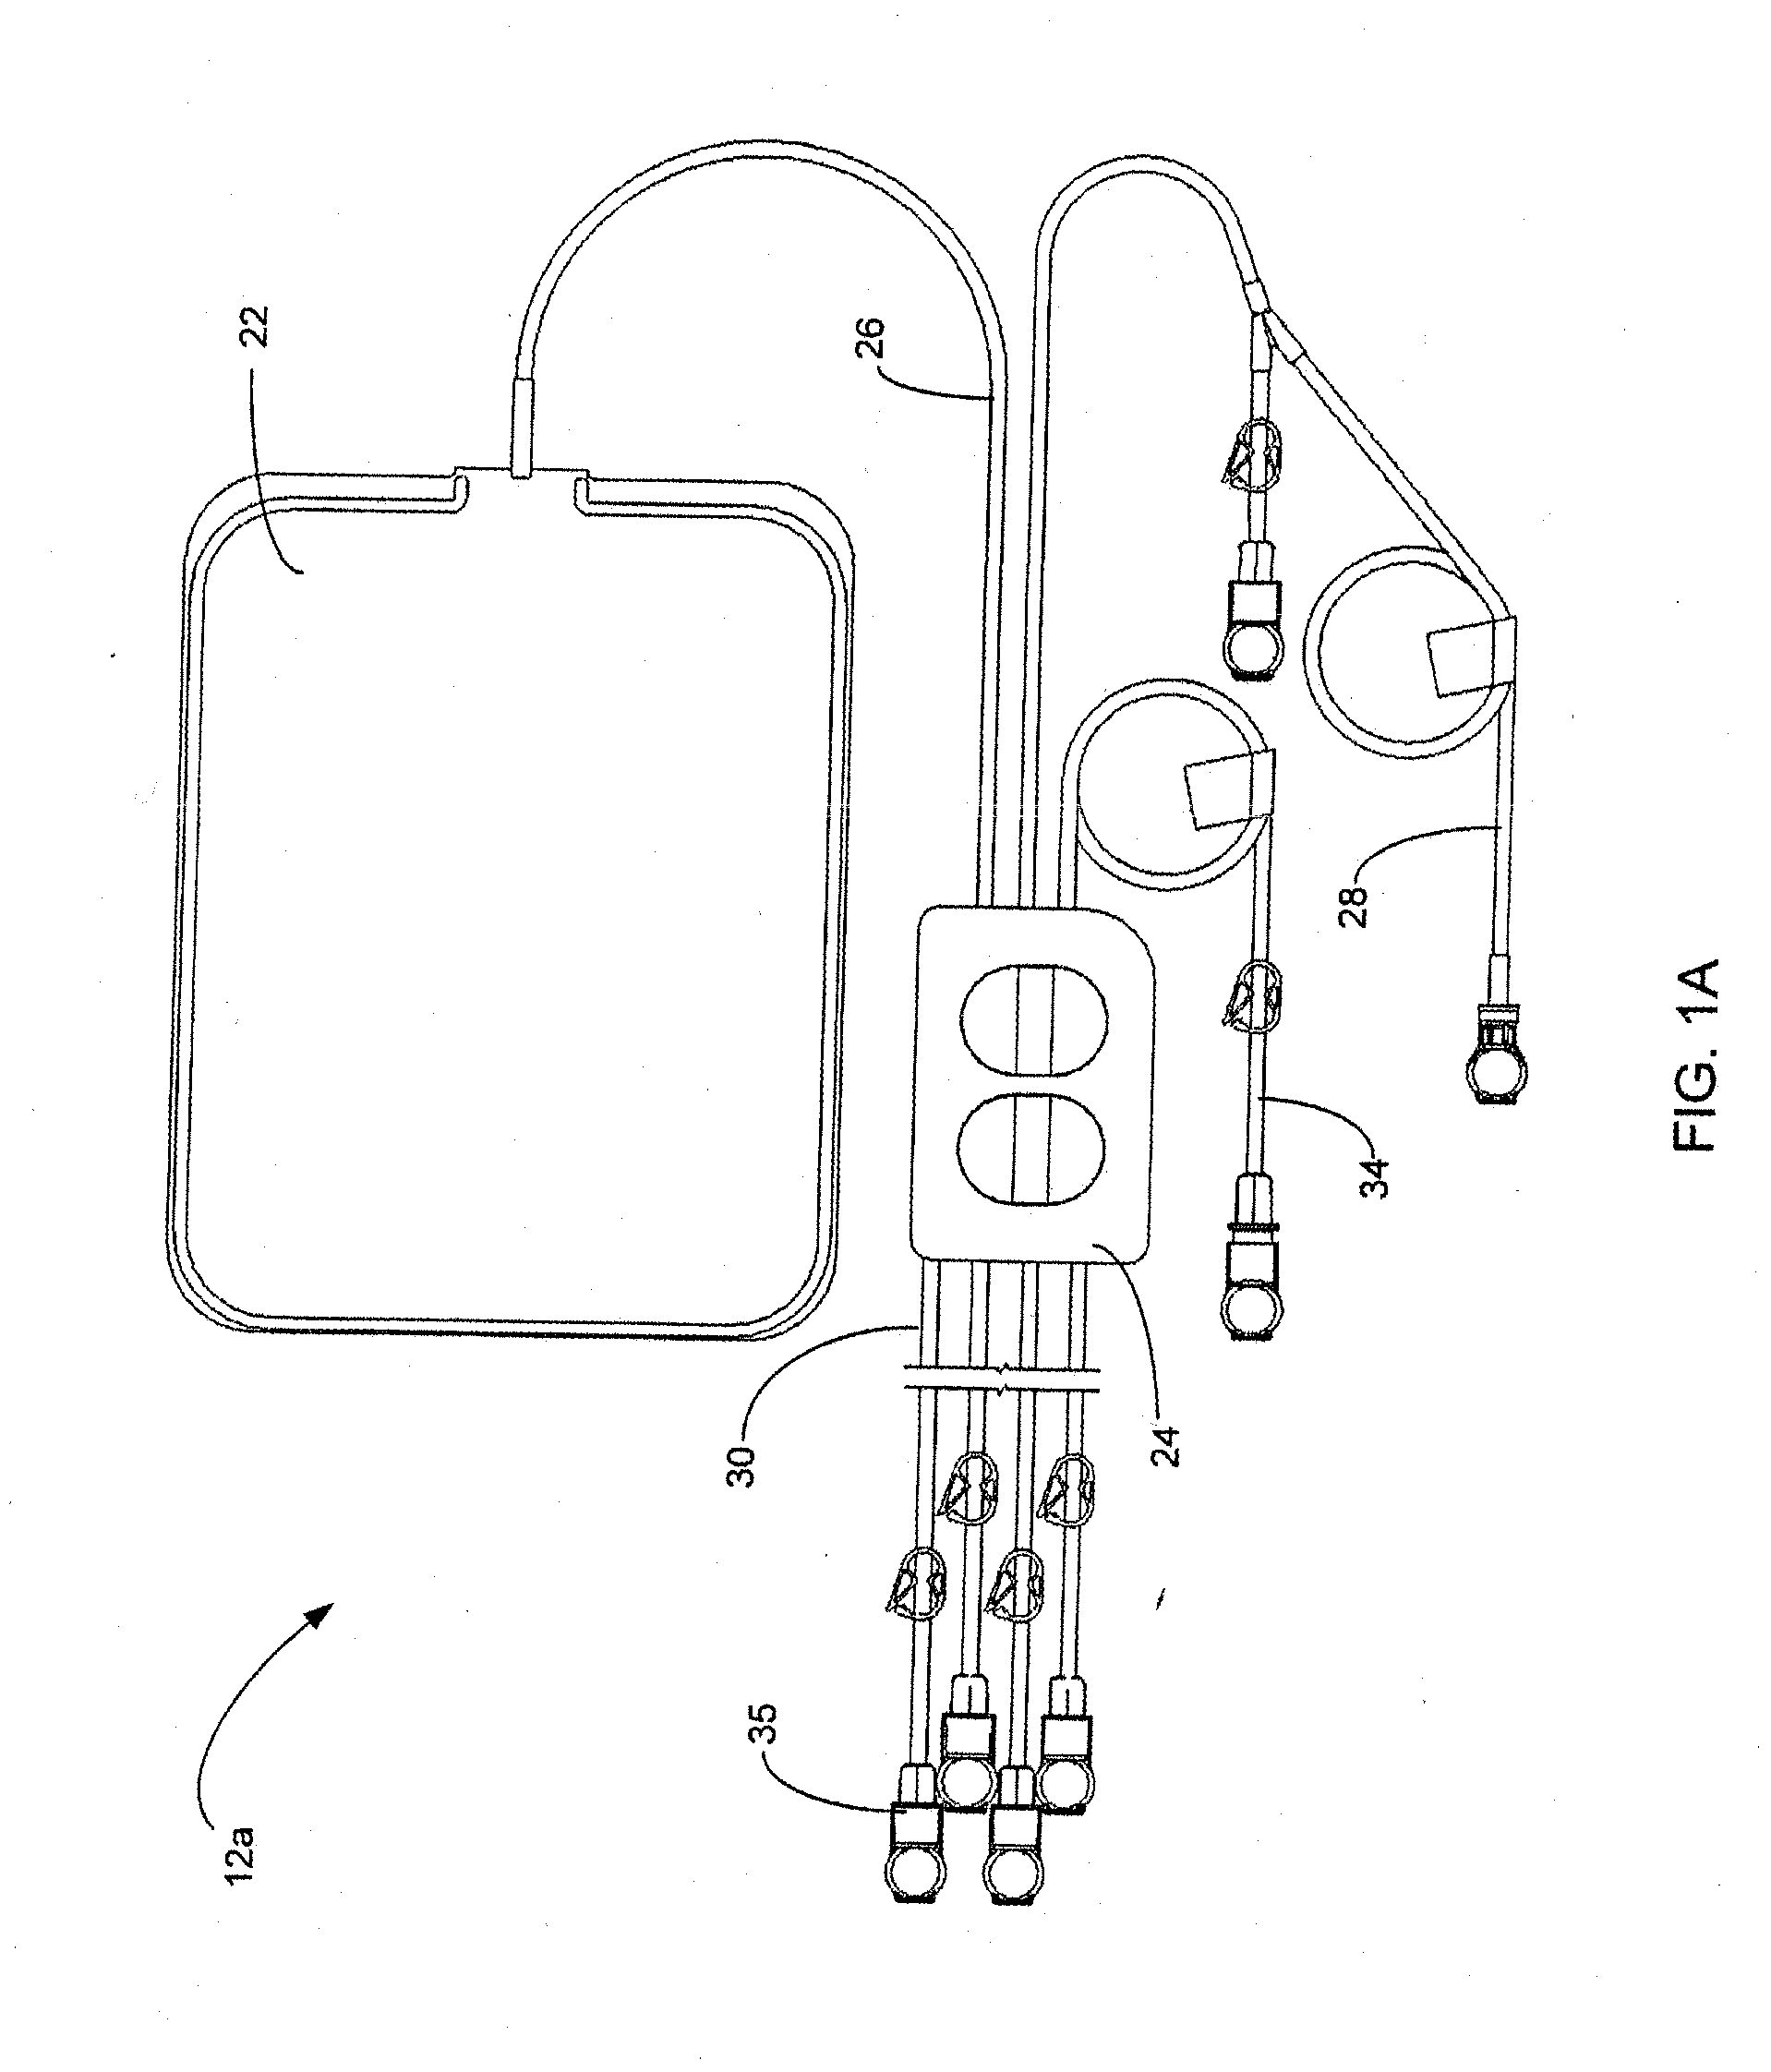 Medical treatment system and methods using a plurality of fluid lines